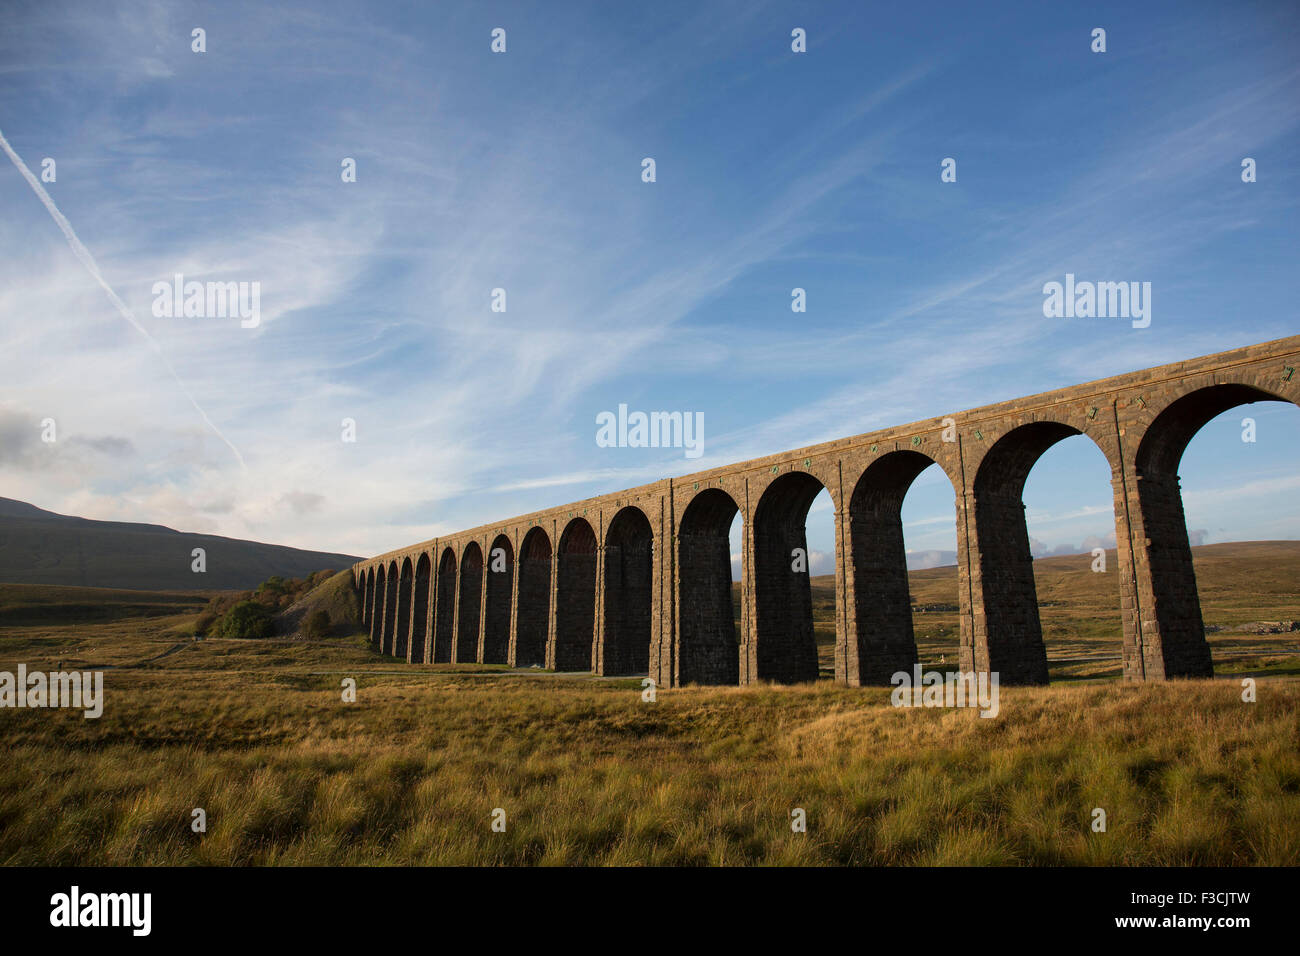 Ribblehead Viaduct or Batty Moss Viaduct carries the Settle-Carlisle Railway across valley of the River Ribble at Ribblehead, in North Yorkshire Dales, England, UK. This impressive Victorian architectural wonder was designed by engineer, John Sydney Crossley and was built between 1870 and 1874. Stock Photo